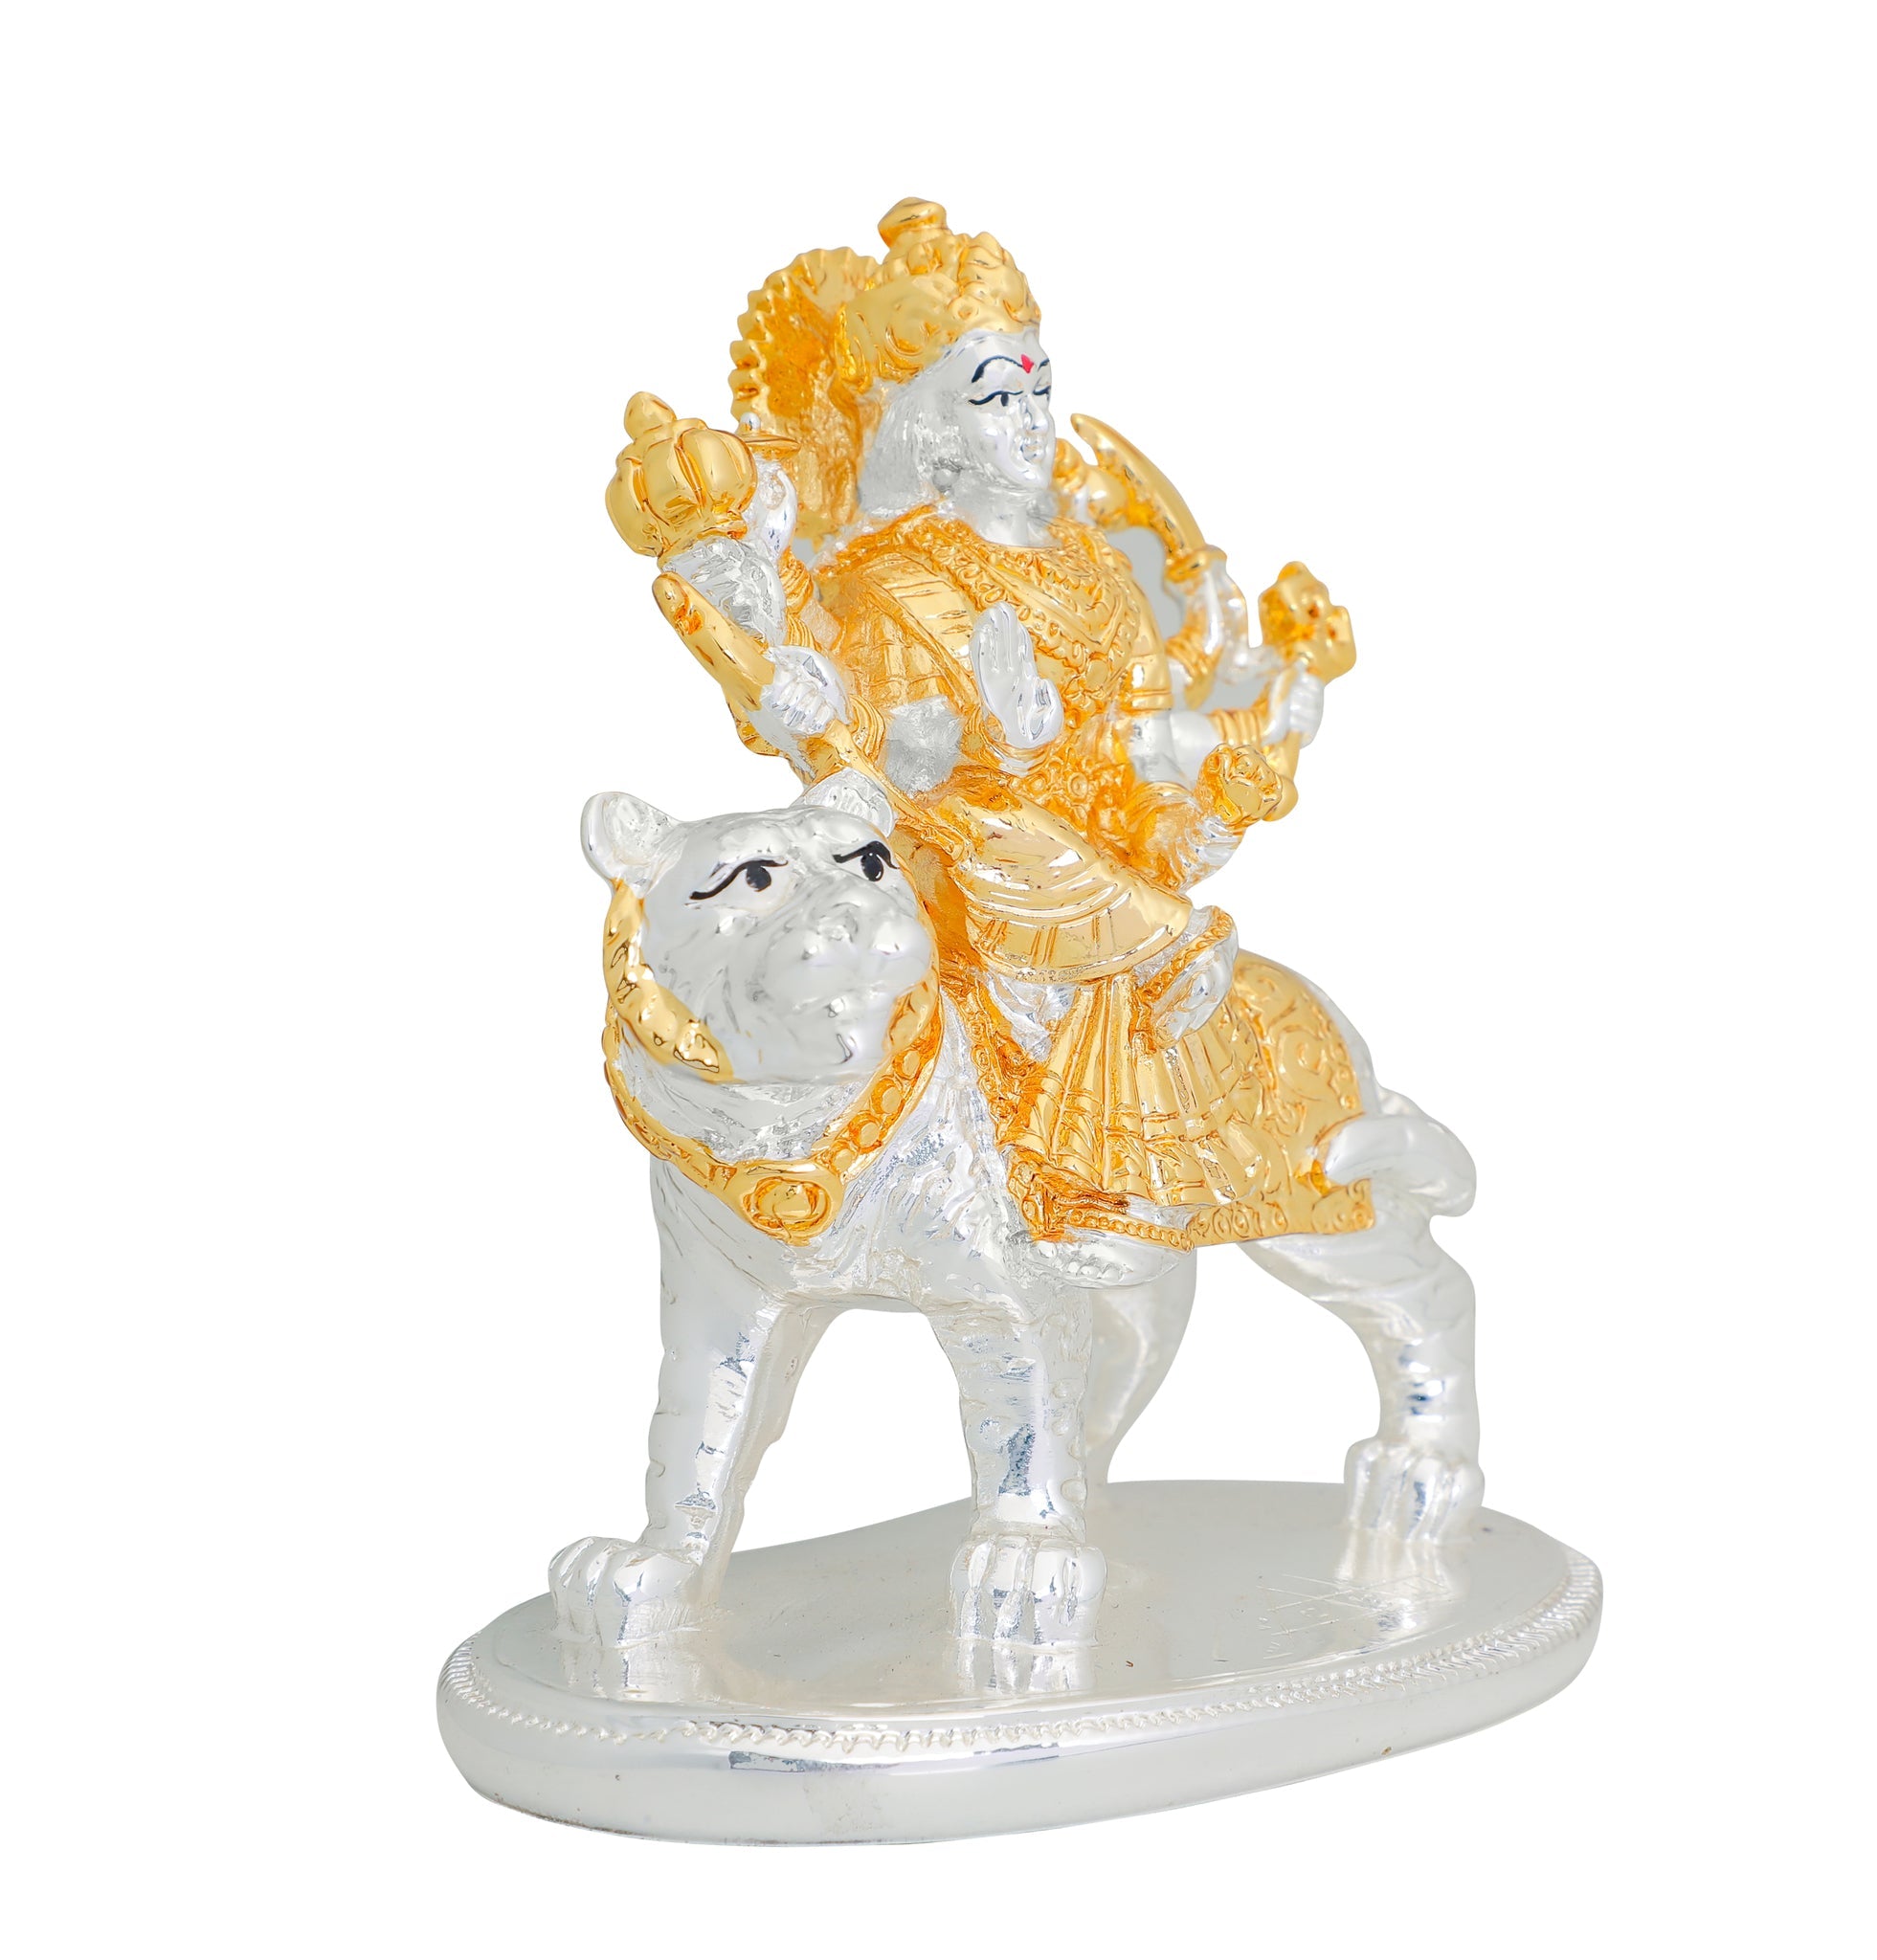 Lord Ambe Maa Murti 999 Gold & Silver Plated